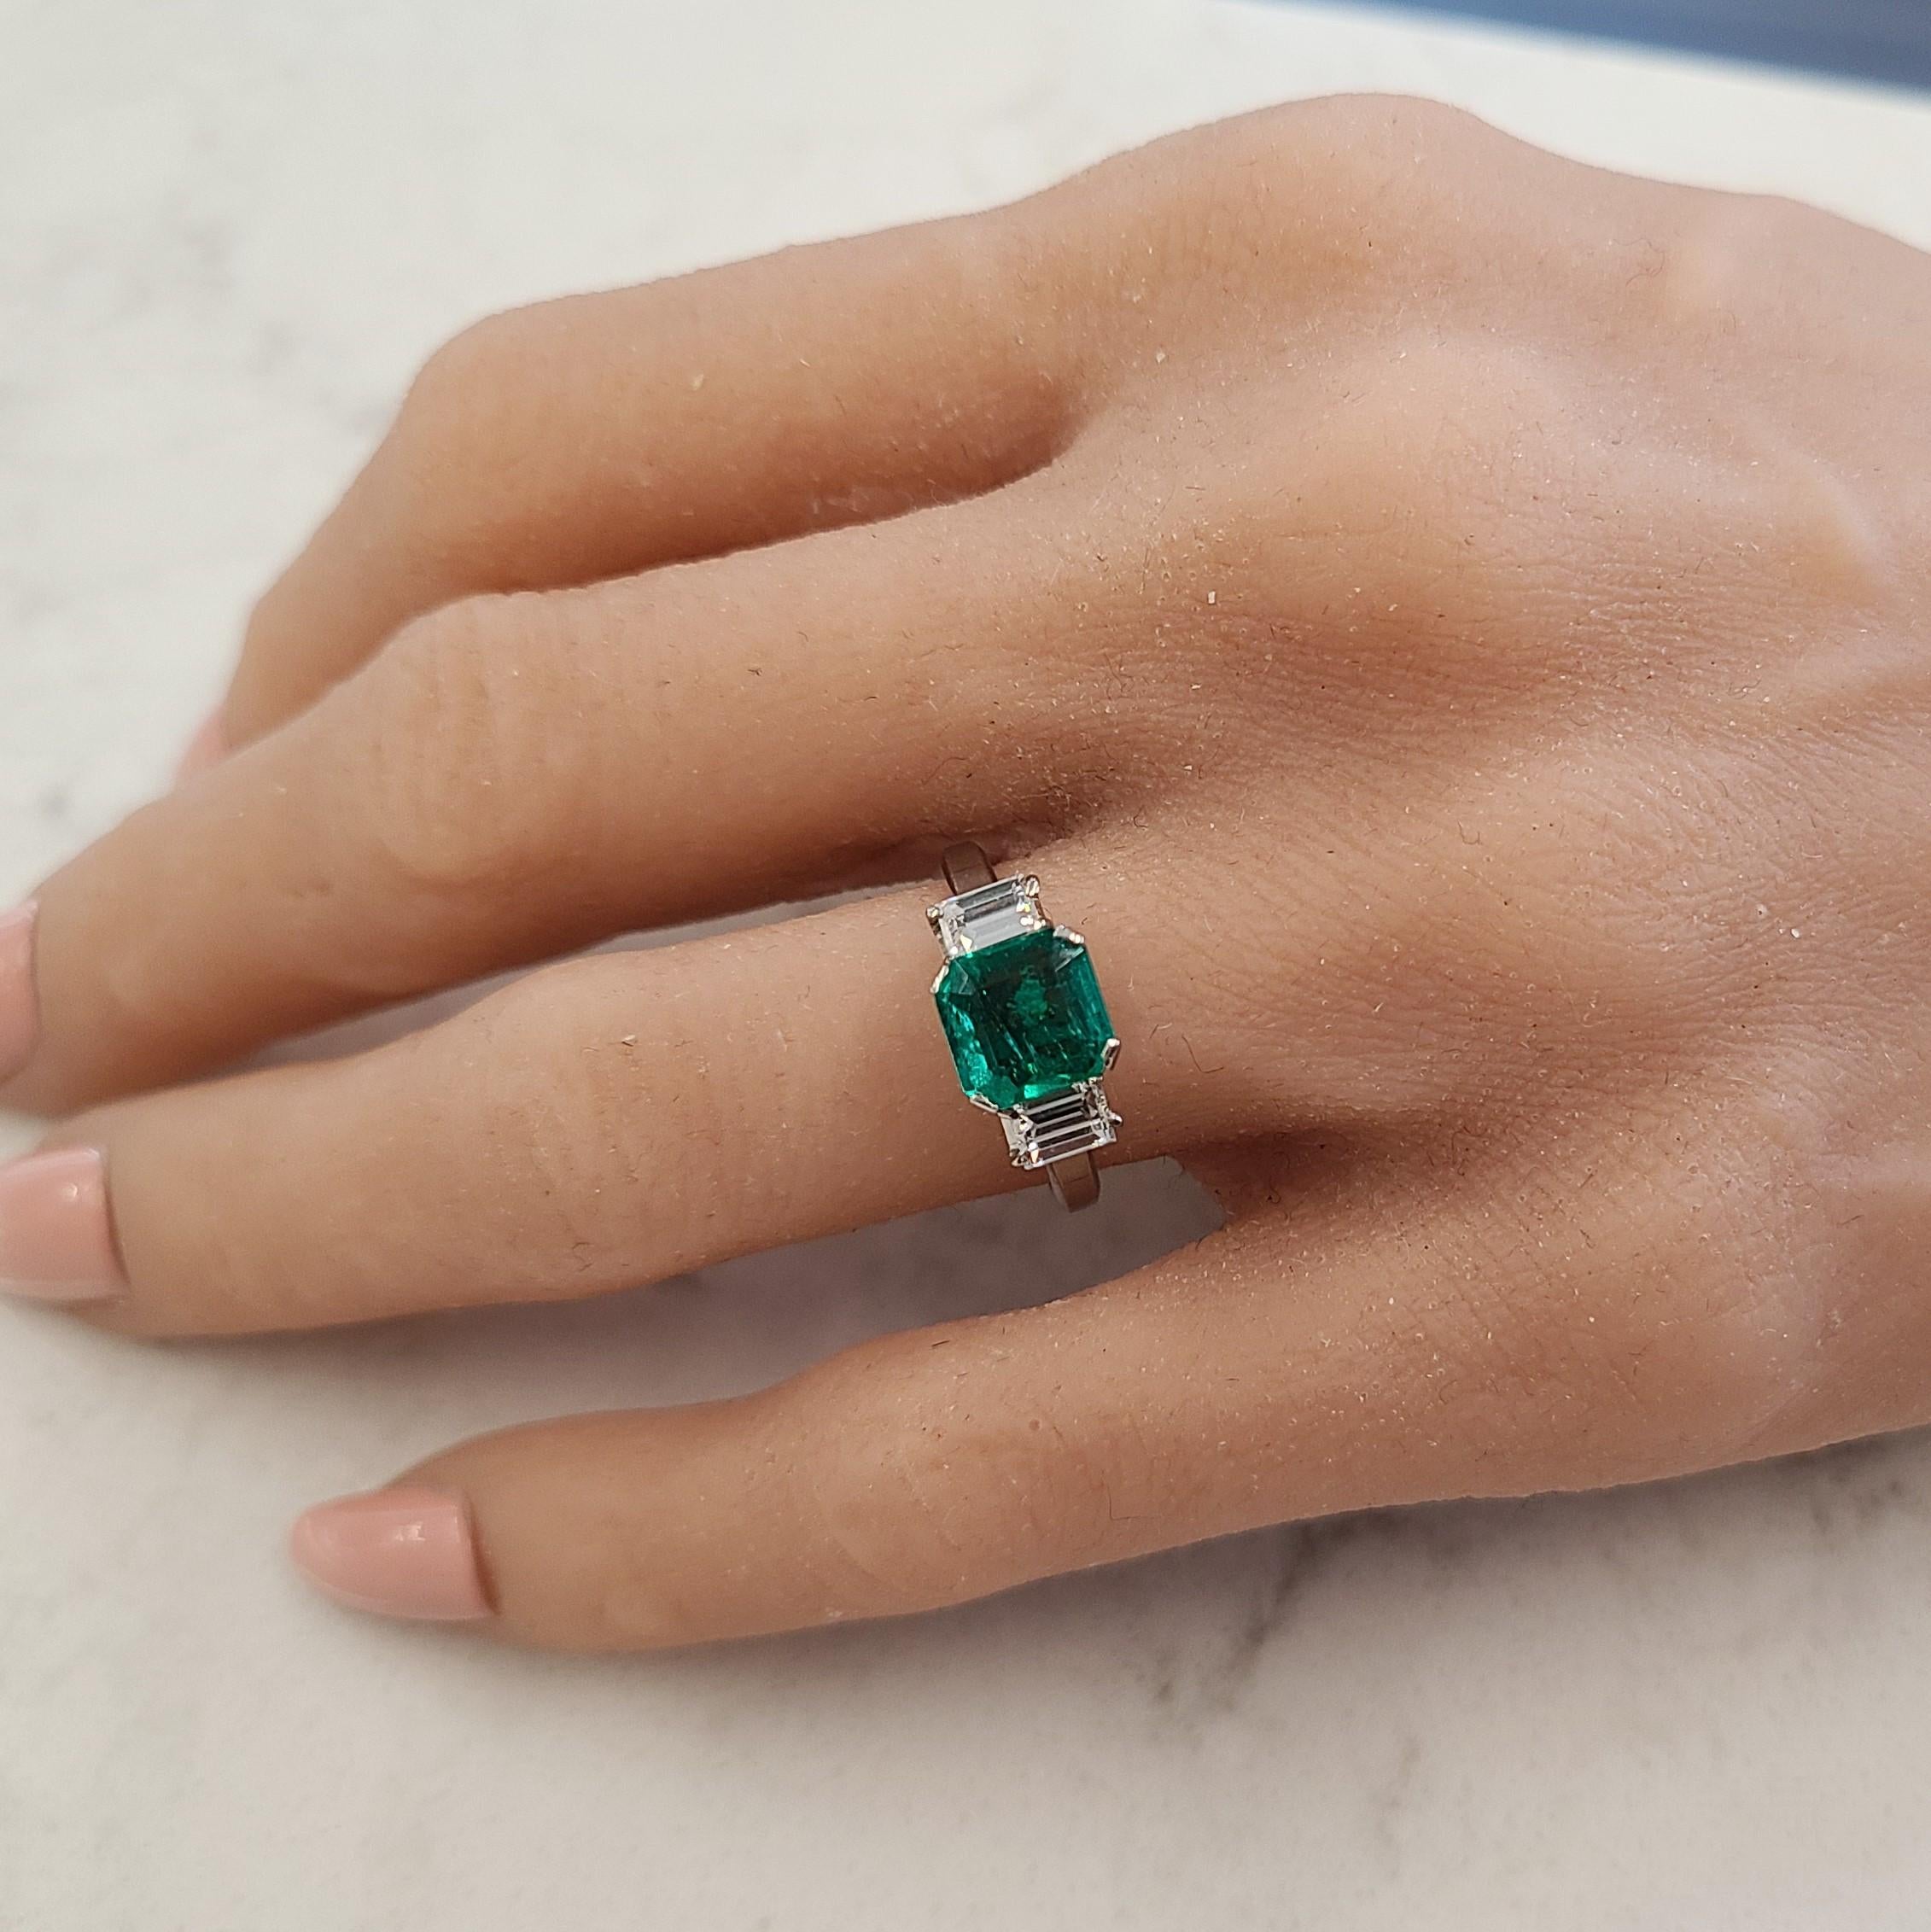 This Colombian Emerald ring in platinum is a perfect birthday or anniversary gift for the glamorous one. The stylishly placed baguette diamonds make this 3-stone ring inexplicably divine! We only use Natural AAA Emeralds which are the top 15% of all